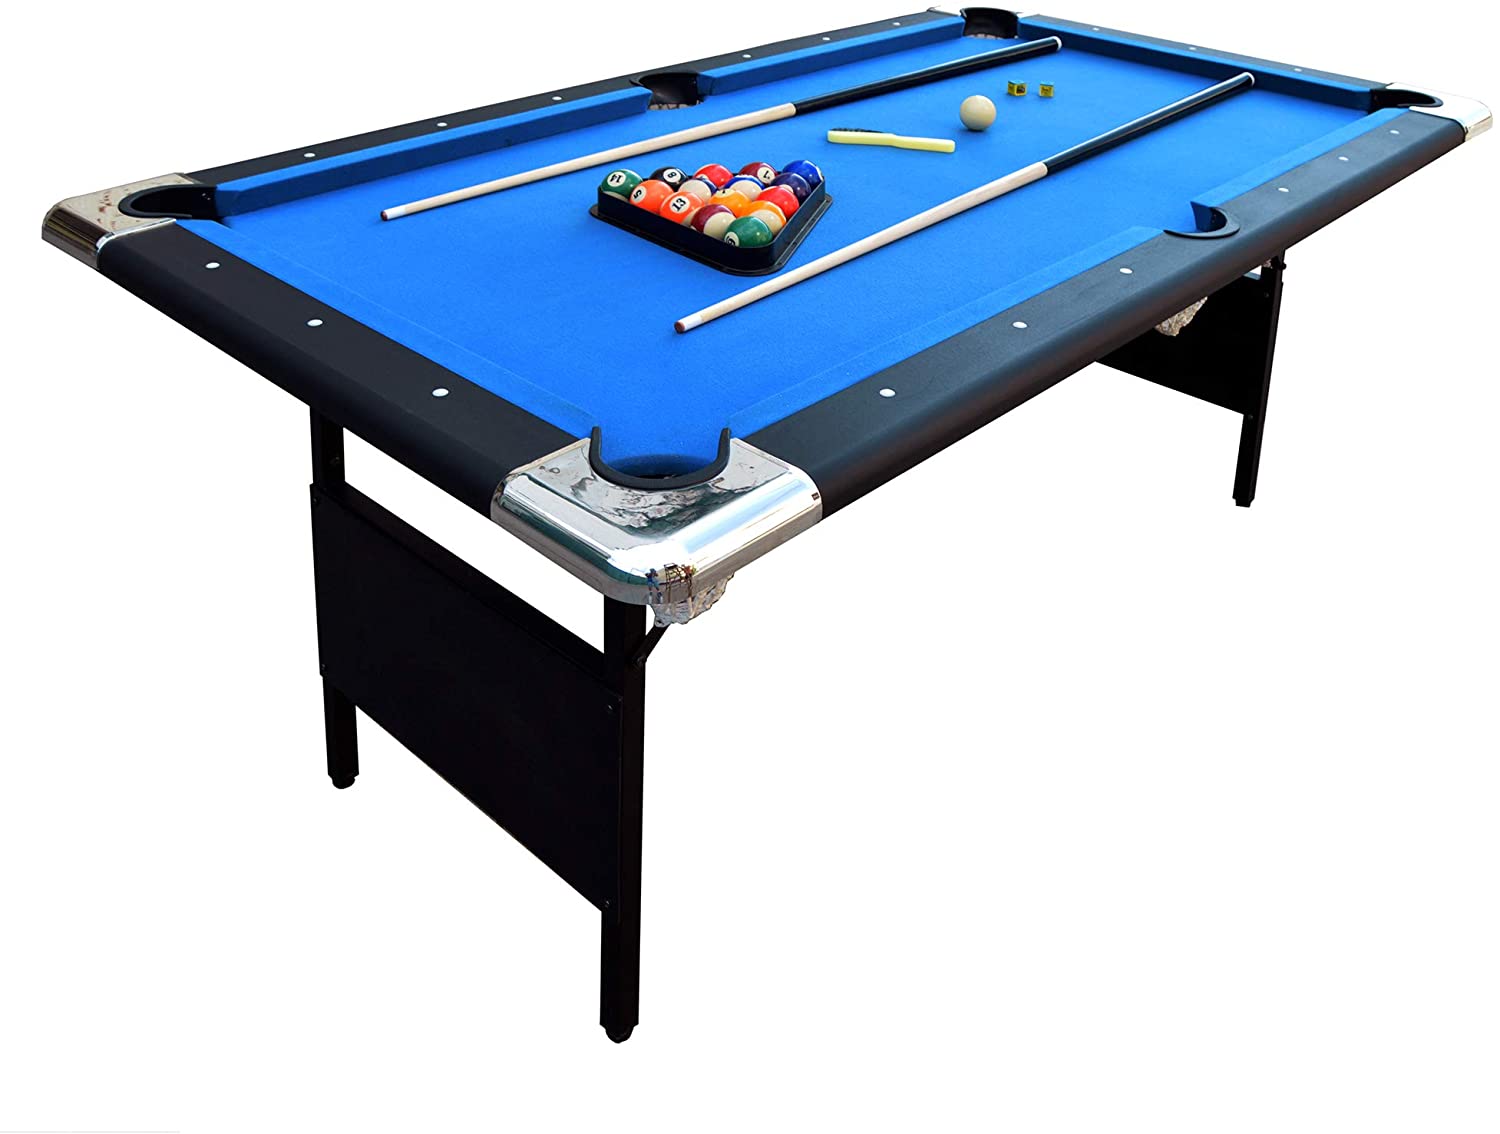 Hathaway Fairmont Portable 6 Ft Pool Table For Families With Easy Folding For Storage Includes Balls Cues Chalk  ?resize=200